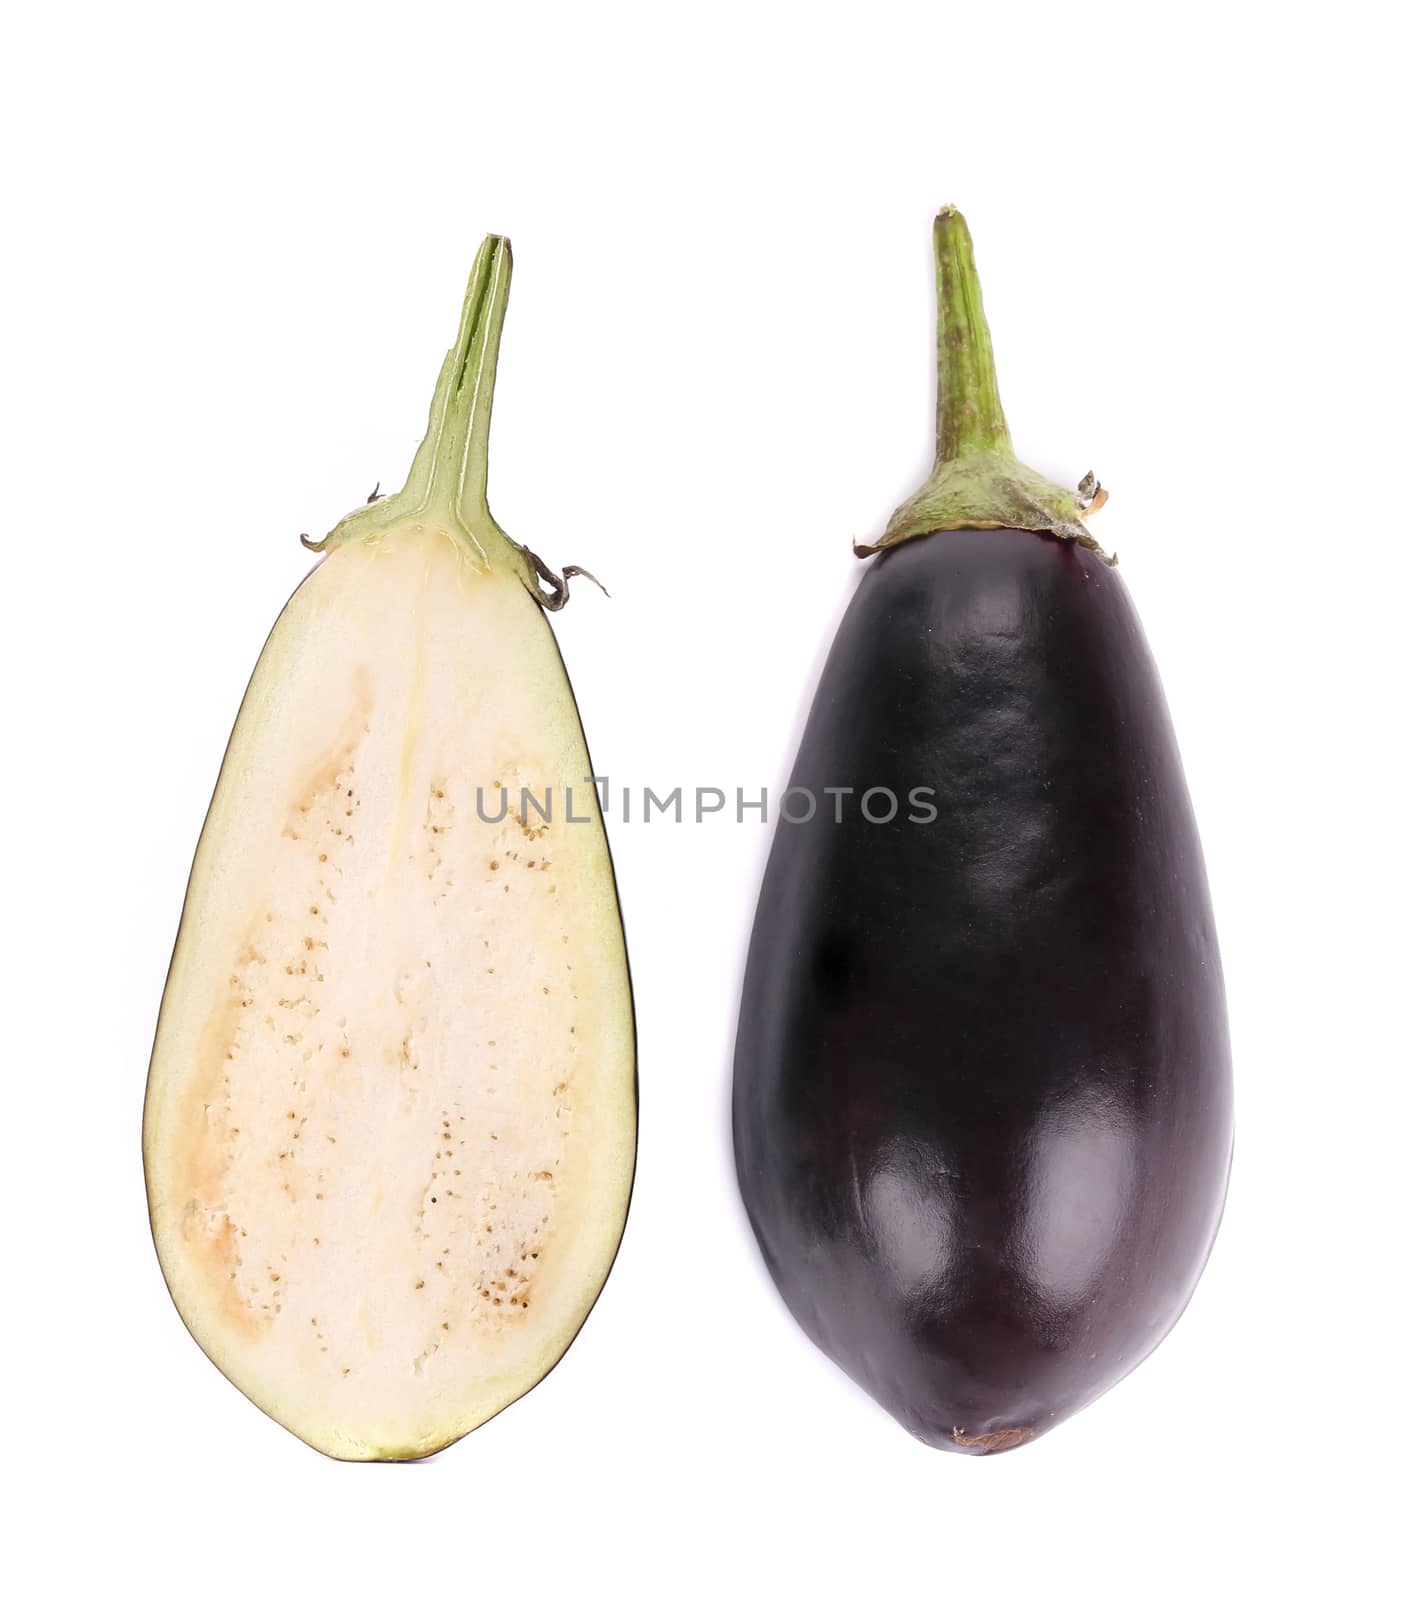 Half of eggplant. Isolated on a white background.